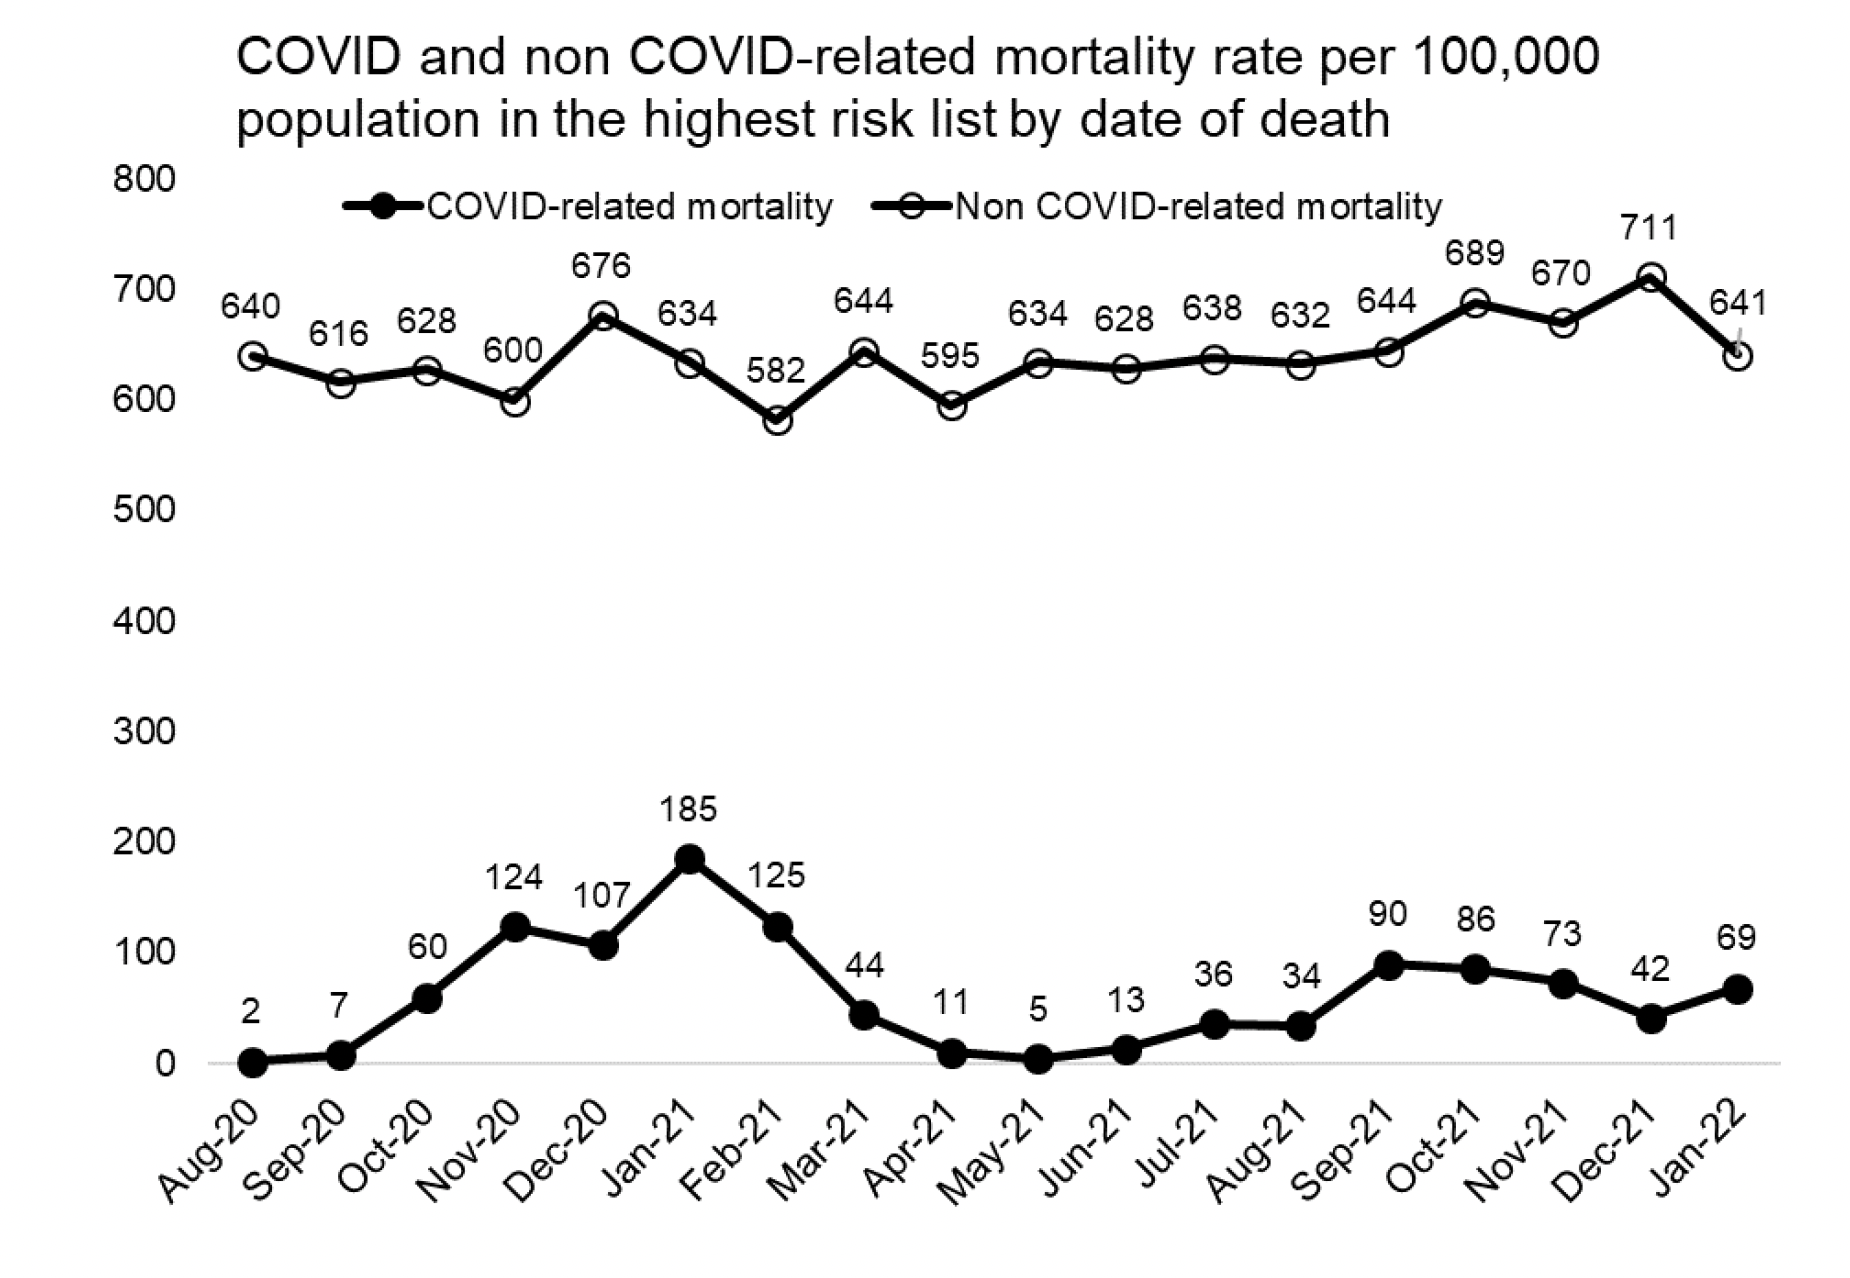 Figure 10 shows the COVID-related mortality rate per 100,000 population by highest risk group and date of death. In January 2022, the cancer, clinician identified, and rare diseases groups had the highest COVID-related mortality rate.